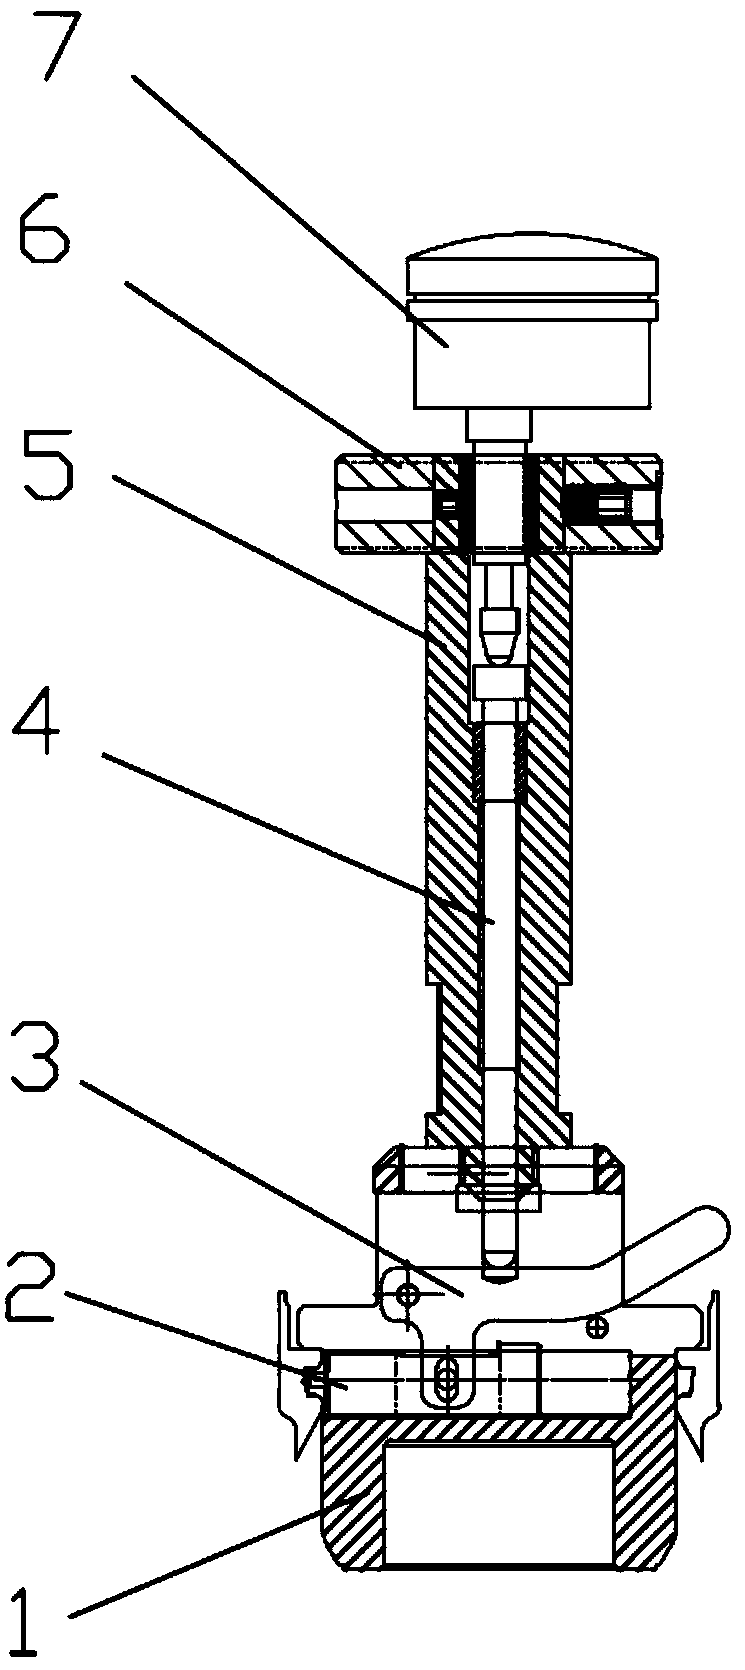 Hole coaxiality detection device of automobile brake system clamp body